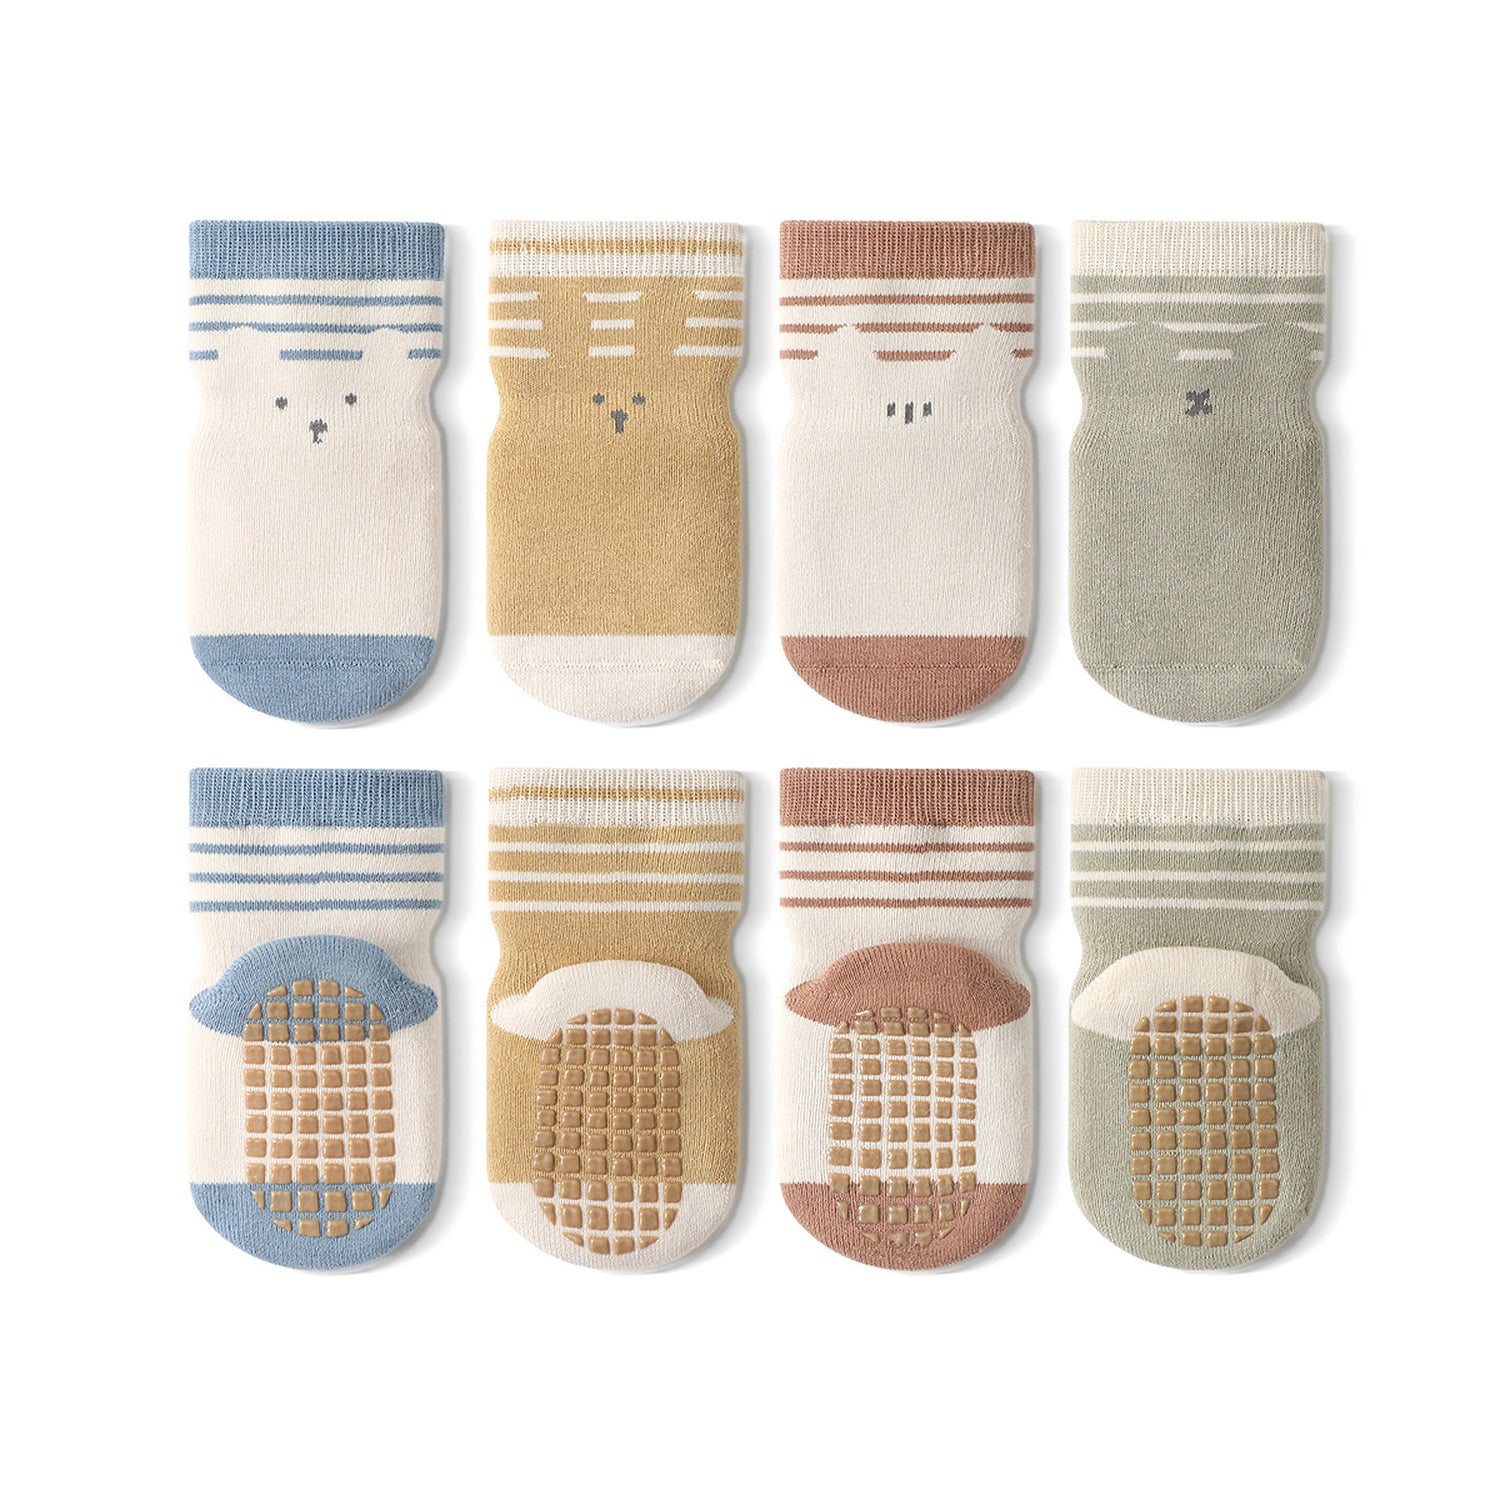 Minimalist design meets practicality in these solid-colored, stay-on socks for babies.